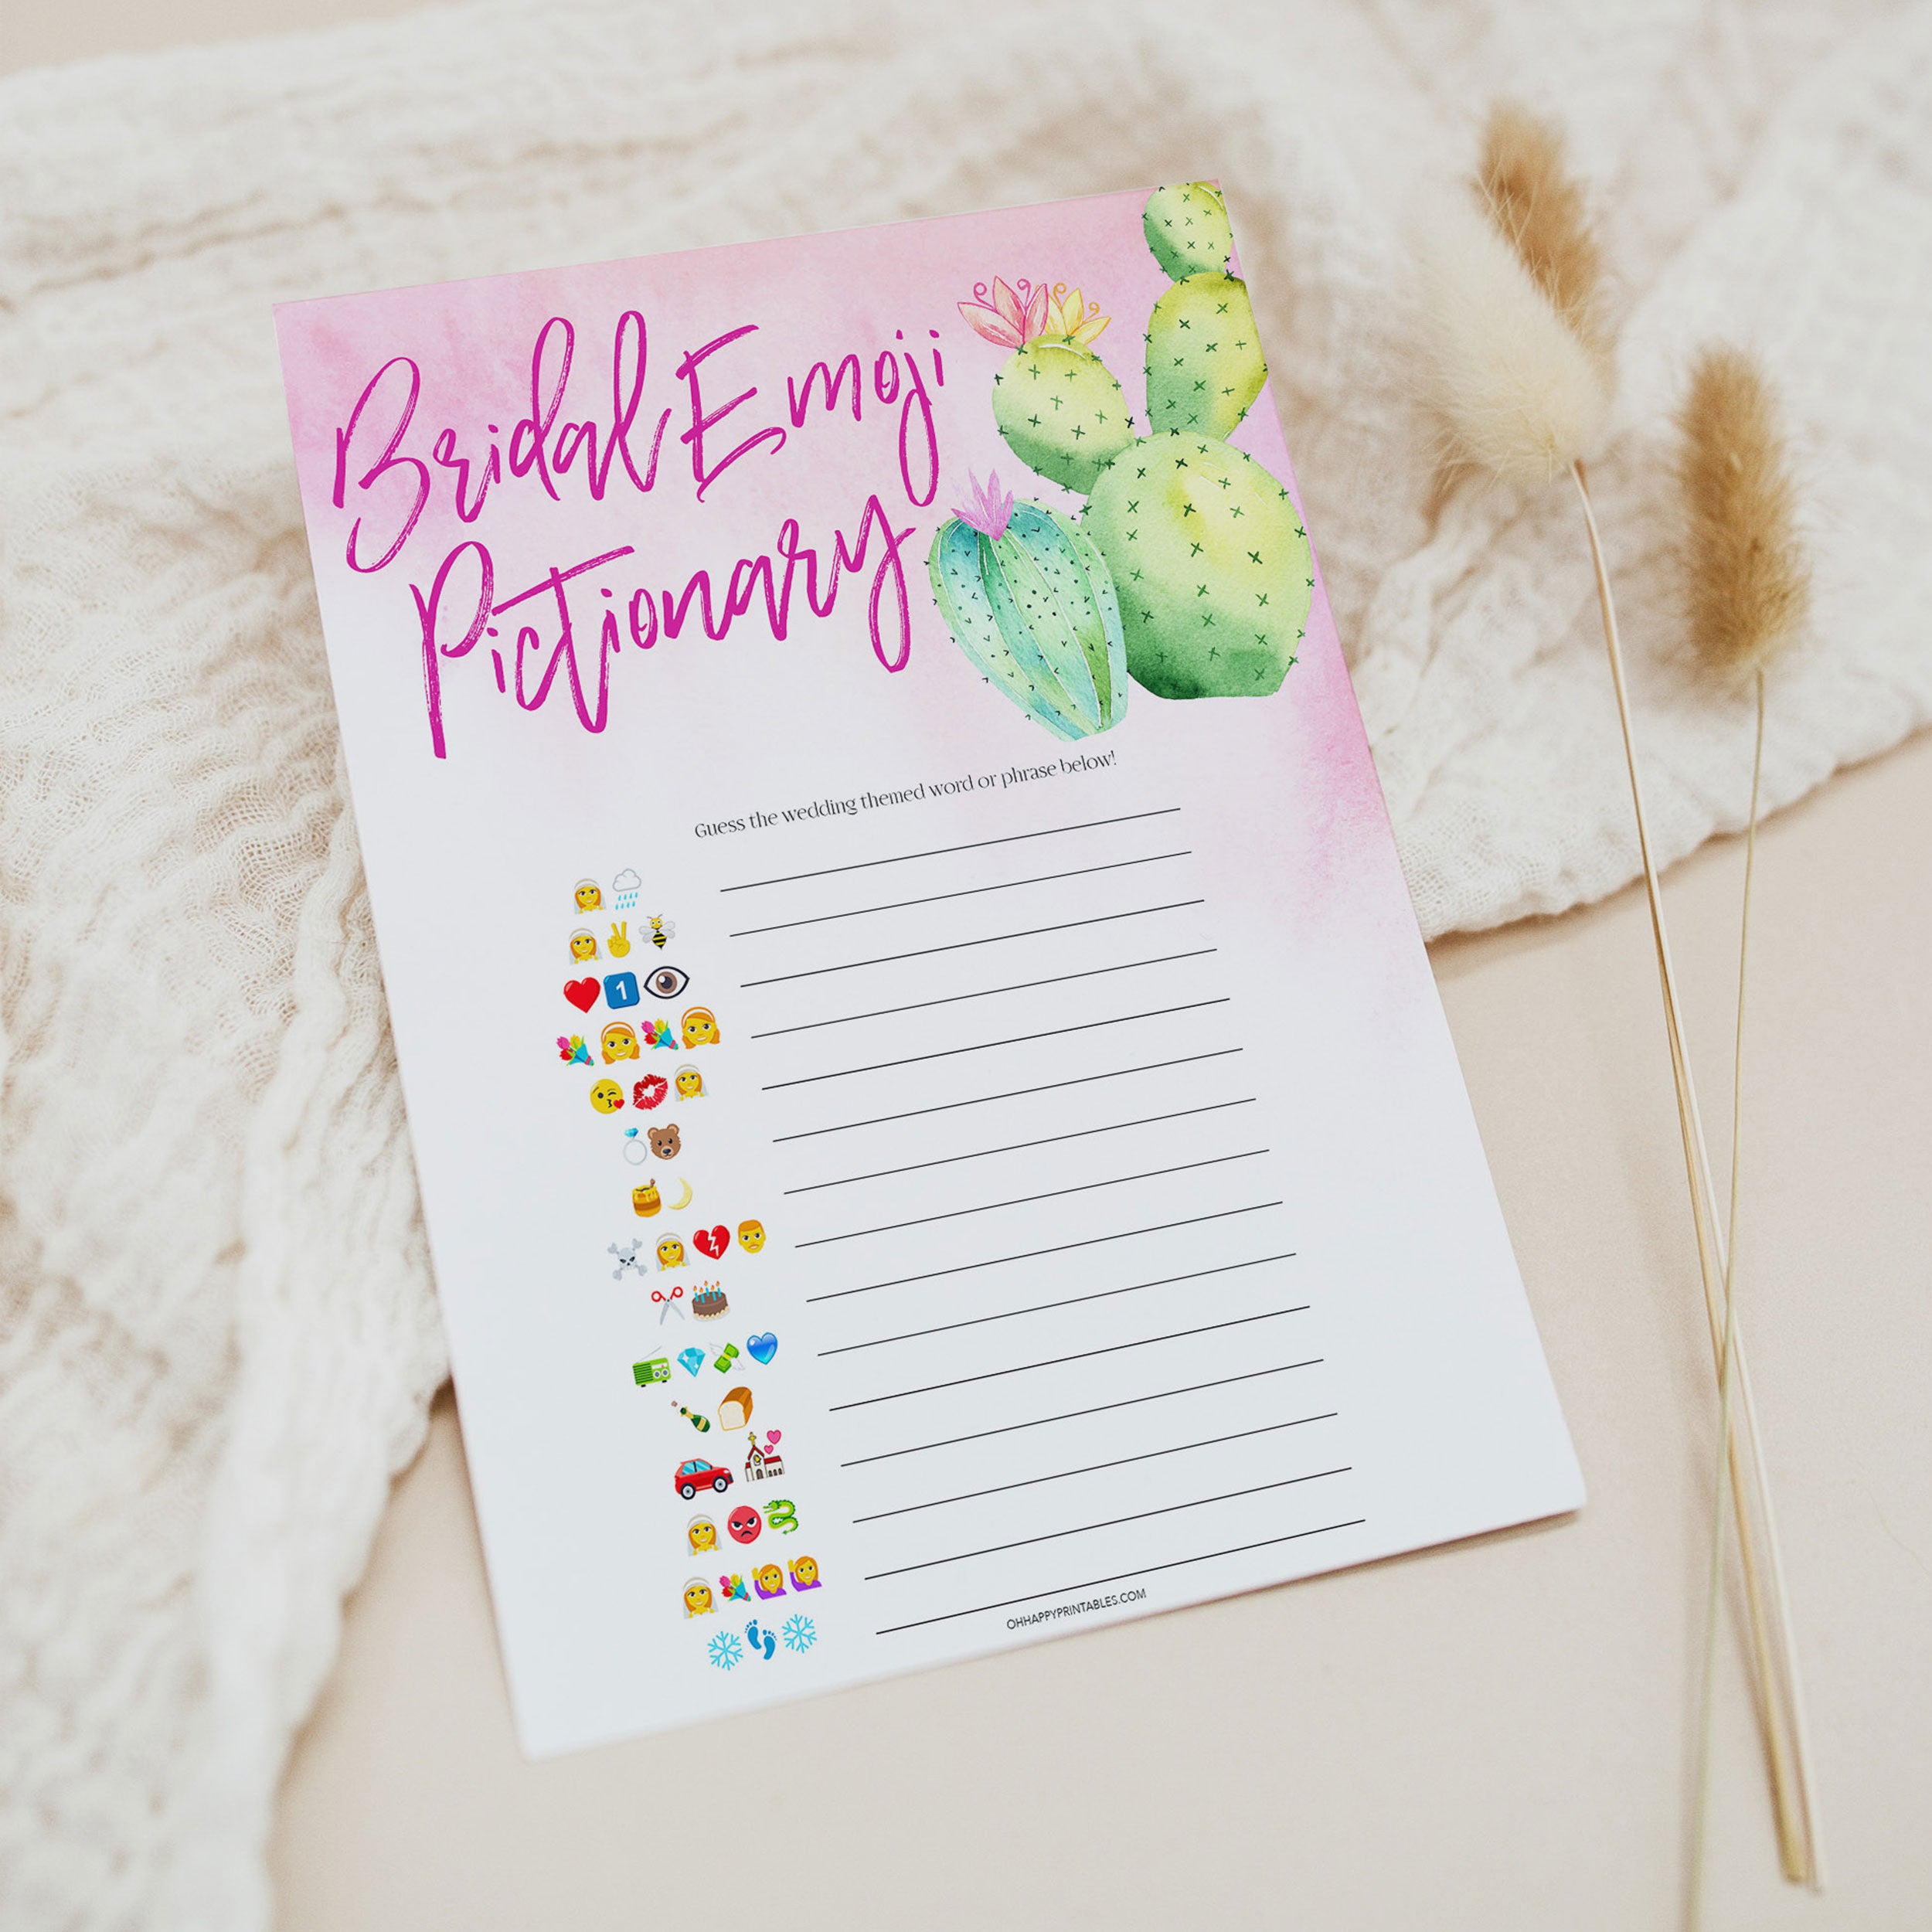 Bridal shower game printable Bridal Emoji Pictionary, with a pink fiesta background and watercolour cactus design